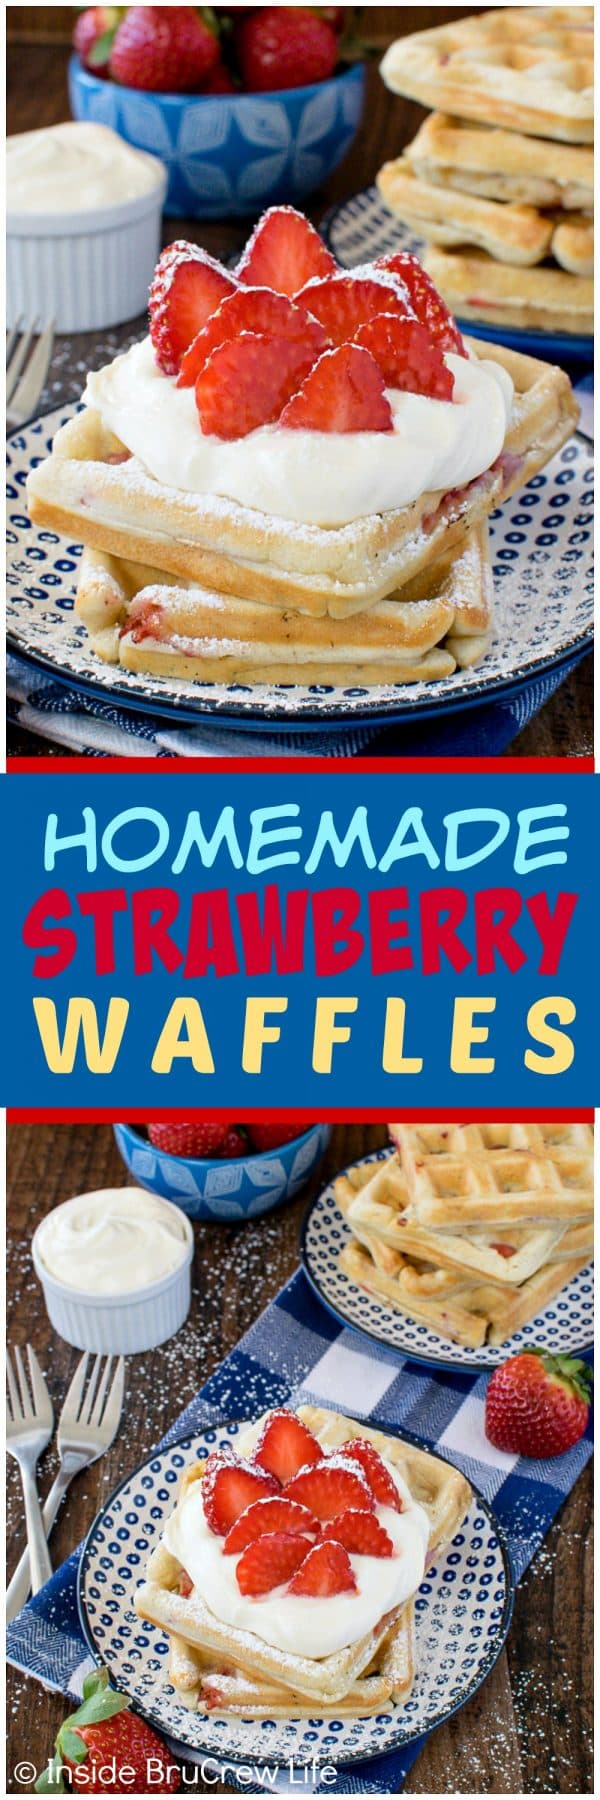 Homemade Strawberry Waffles - this easy breakfast recipe is loaded with fresh berries! Add some lemon cream and more berries for a fun breakfast recipe!